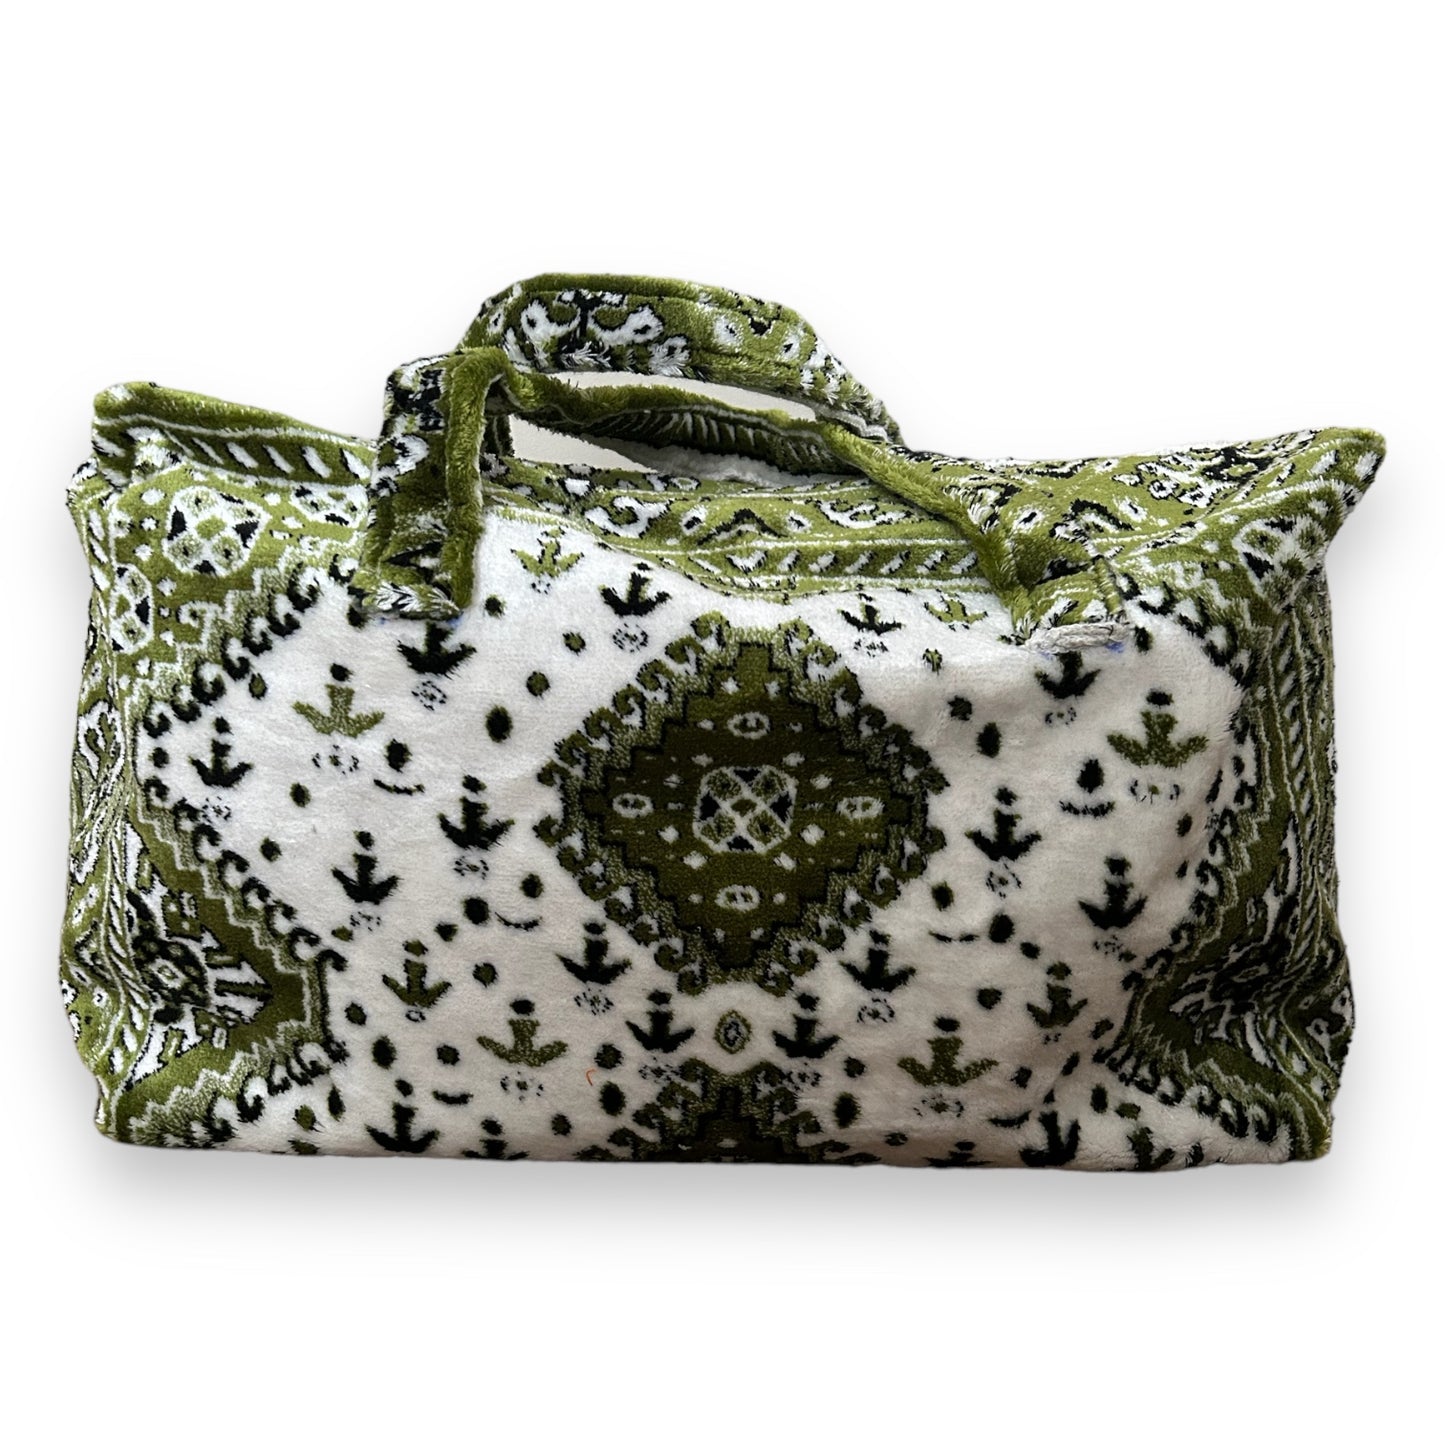 Weekend bag made of carpet fabric in olive green color with white